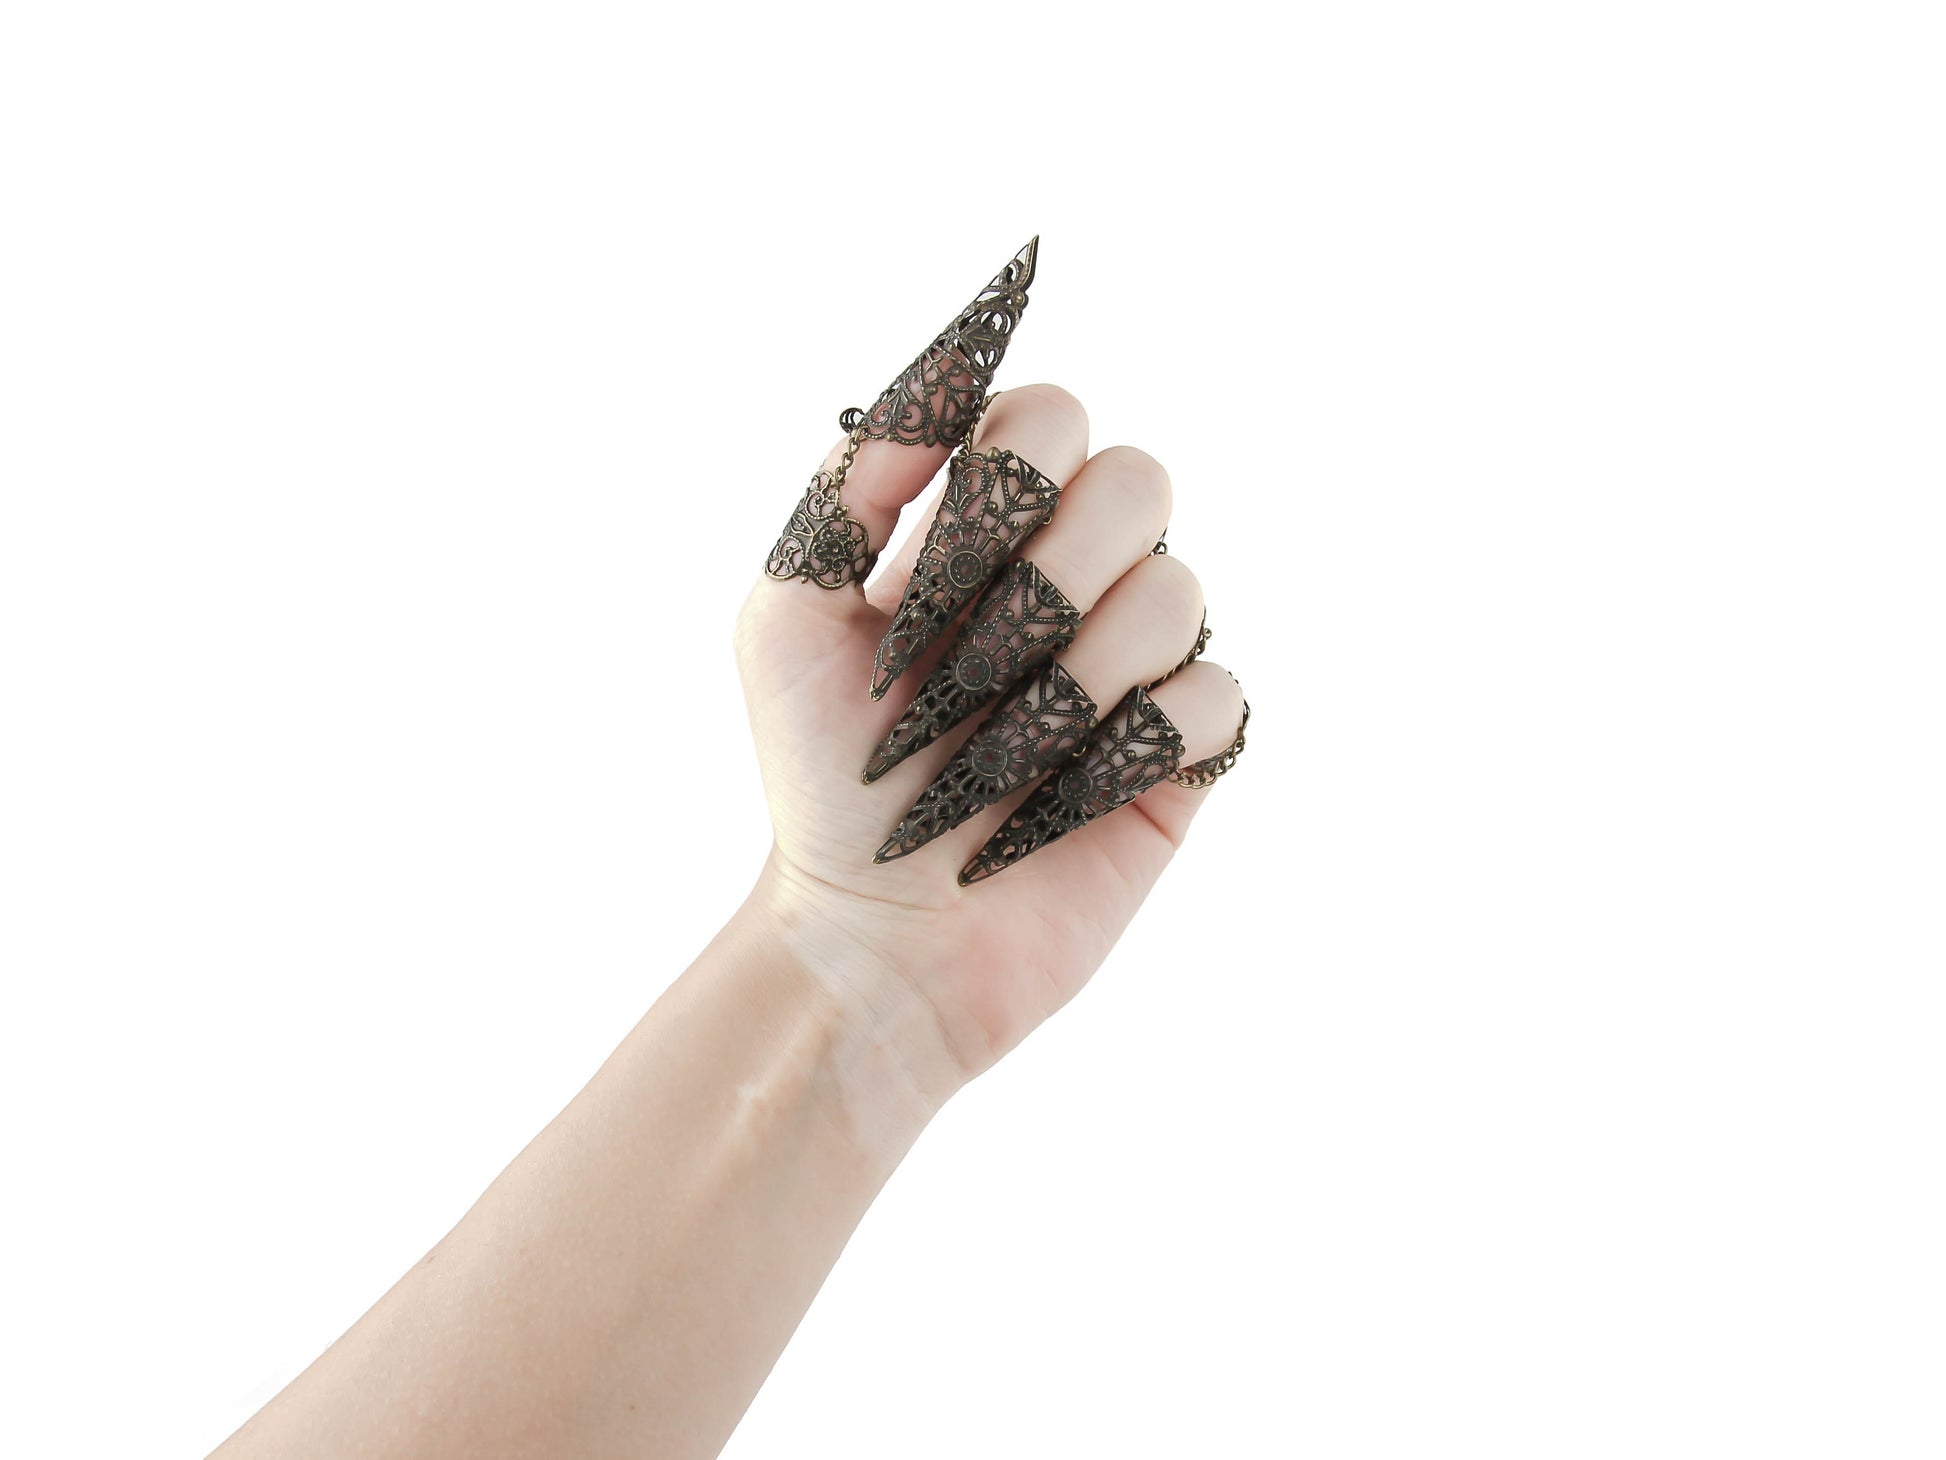 Unveil your inner goth with Myril Jewels' full hand set of intricate bronze rings, each culminating in a striking nail claw. These neo-gothic treasures, perfect for Halloween, embody a bold statement for punk jewelry lovers and those with a witchcore flair, offering a unique touch to any drag queen jewel collection or as a standout goth girlfriend gift